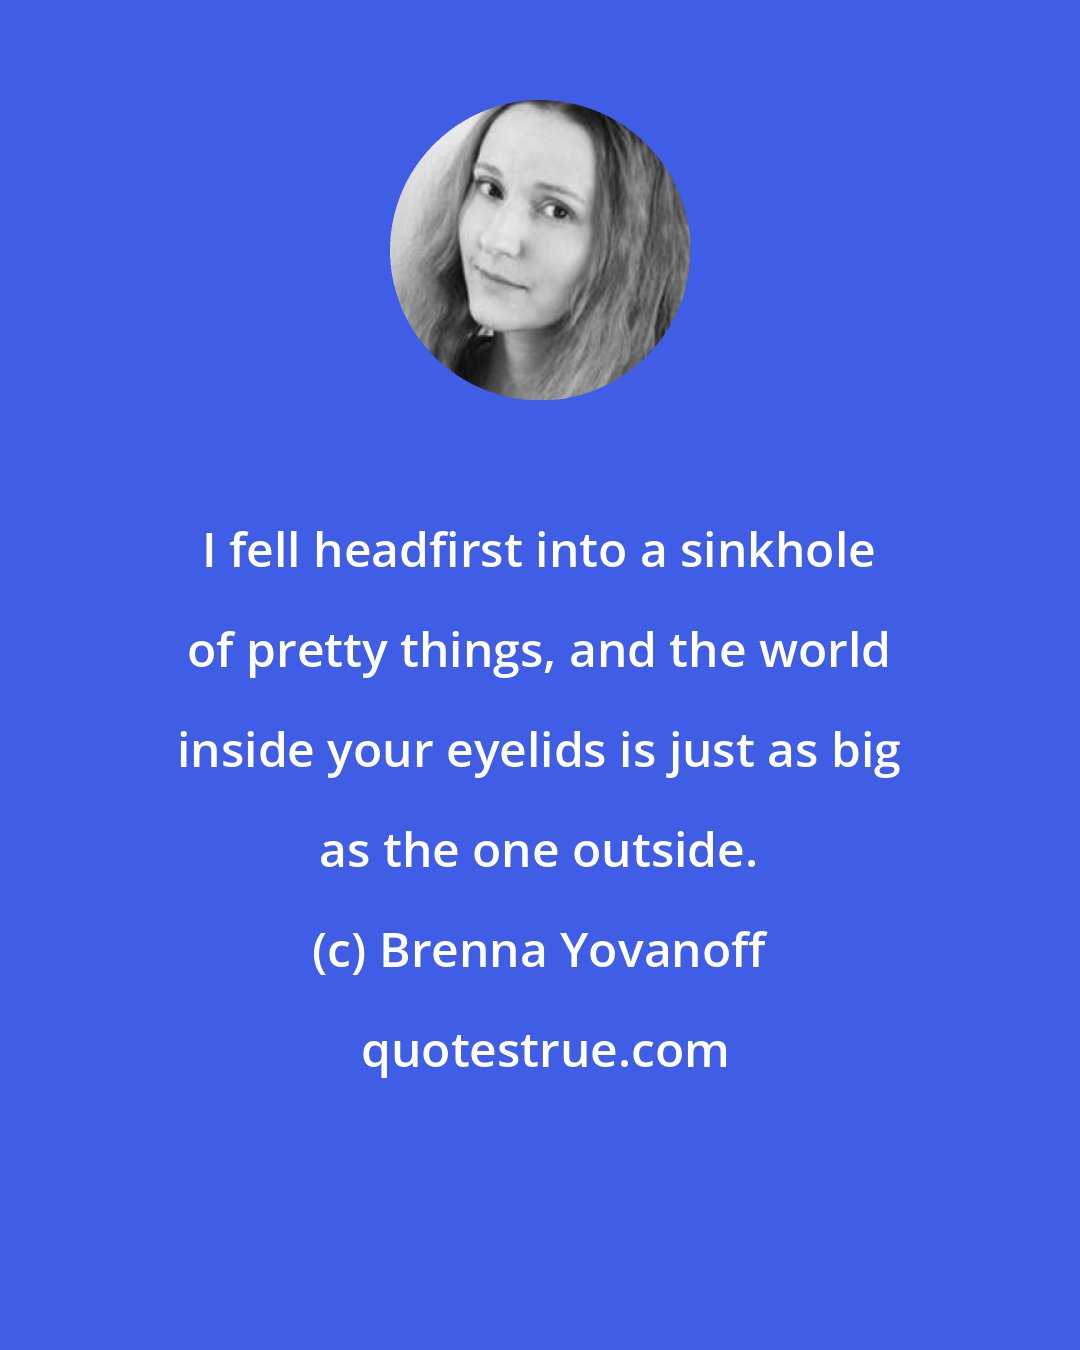 Brenna Yovanoff: I fell headfirst into a sinkhole of pretty things, and the world inside your eyelids is just as big as the one outside.